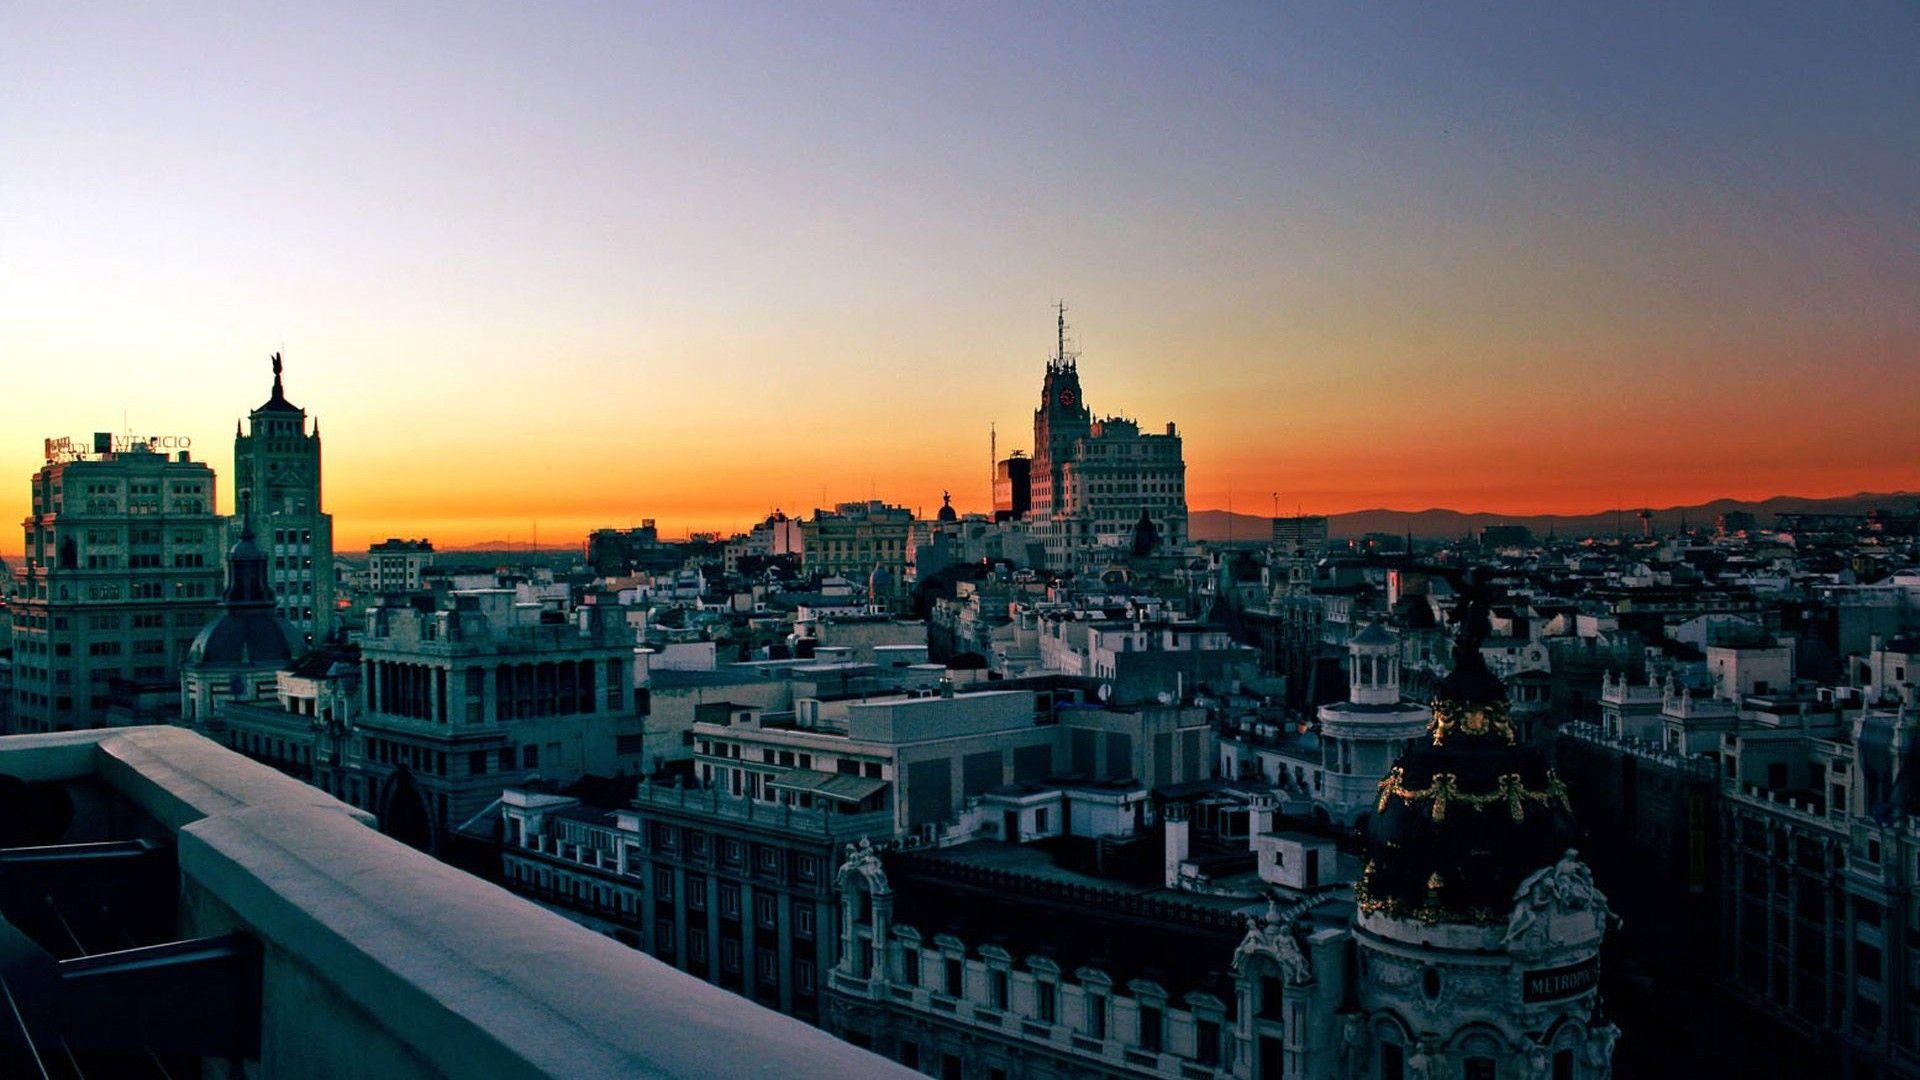 Sunset in Madrid wallpaper and image, picture, photo